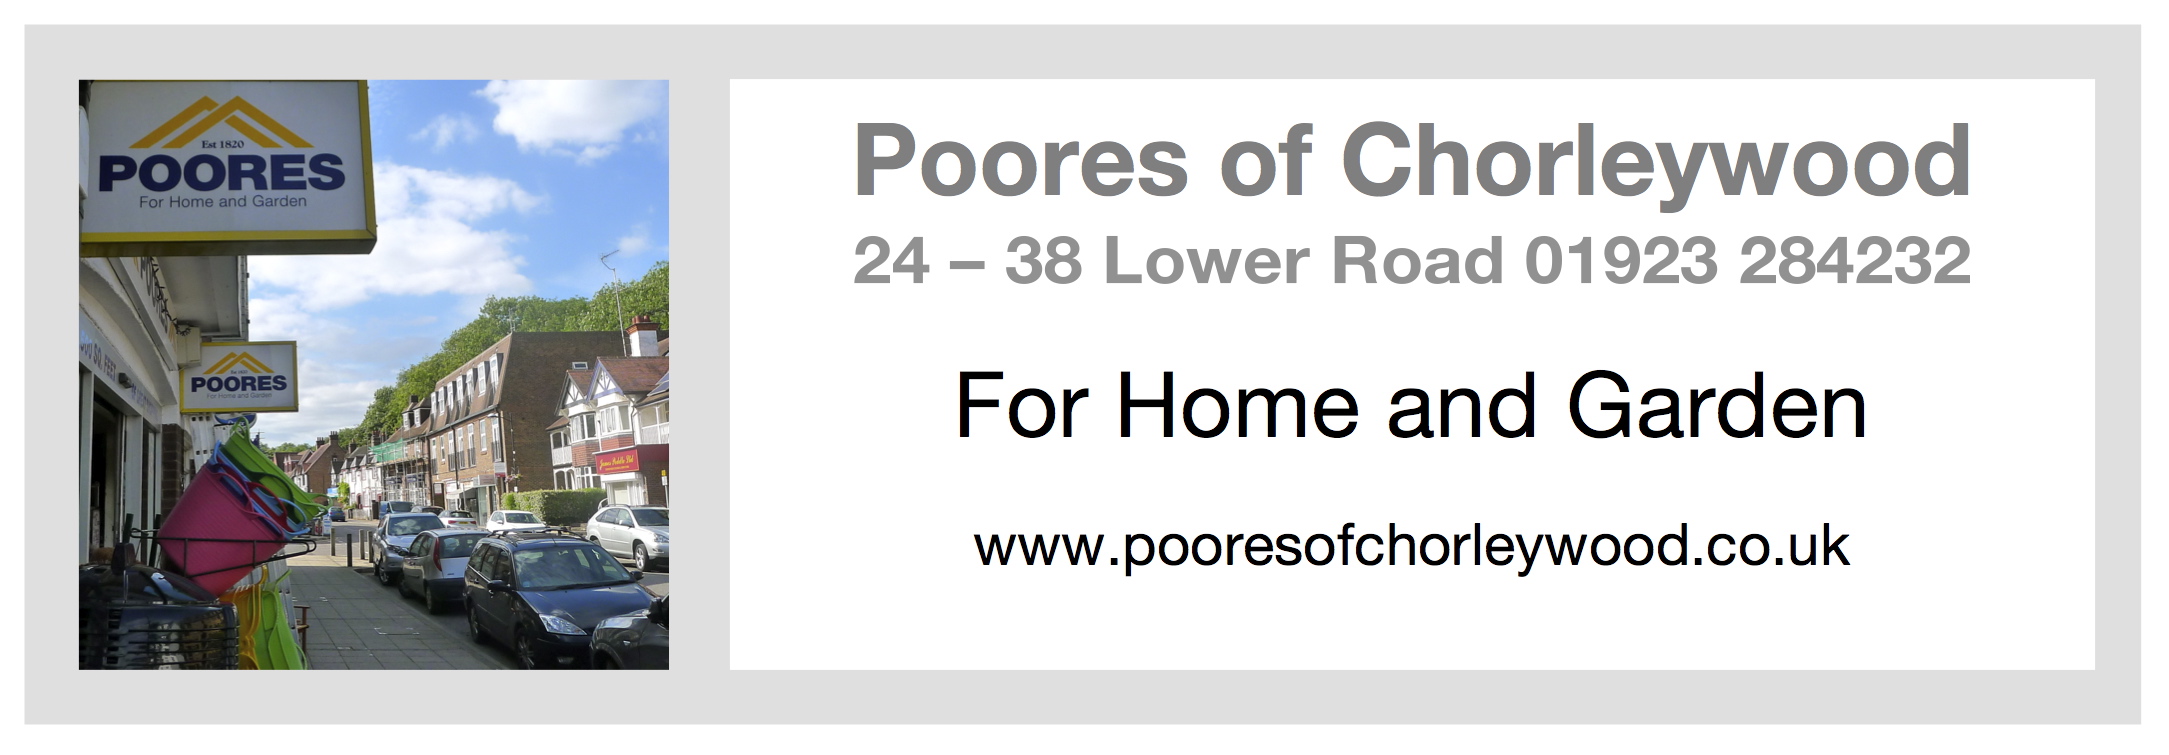 Poores ad